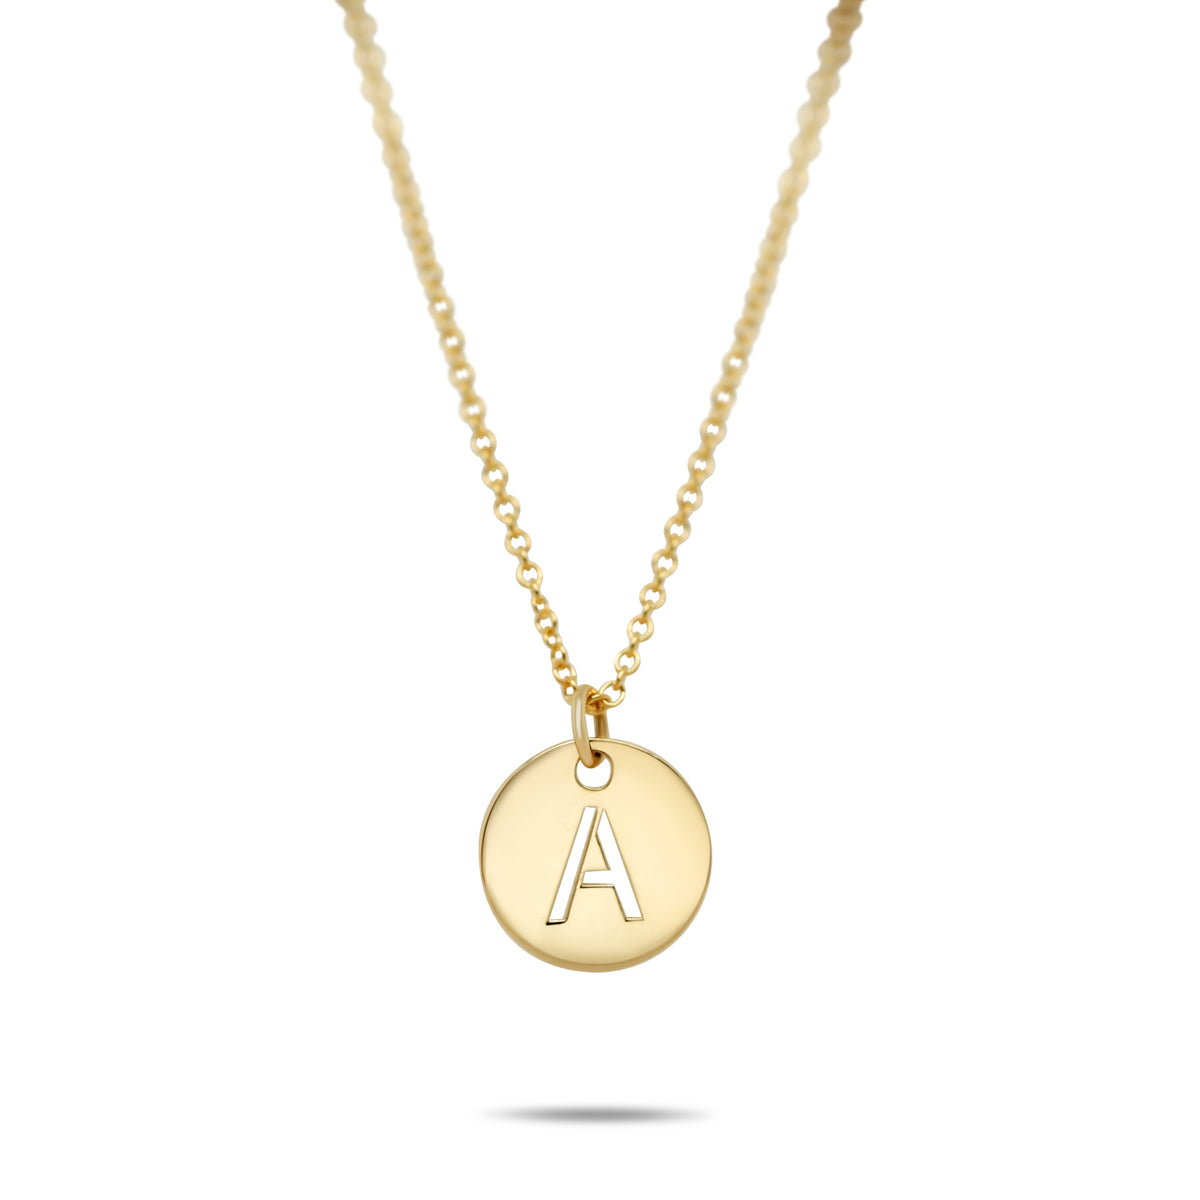 14k gold disc charm necklace with engraved initial personalization